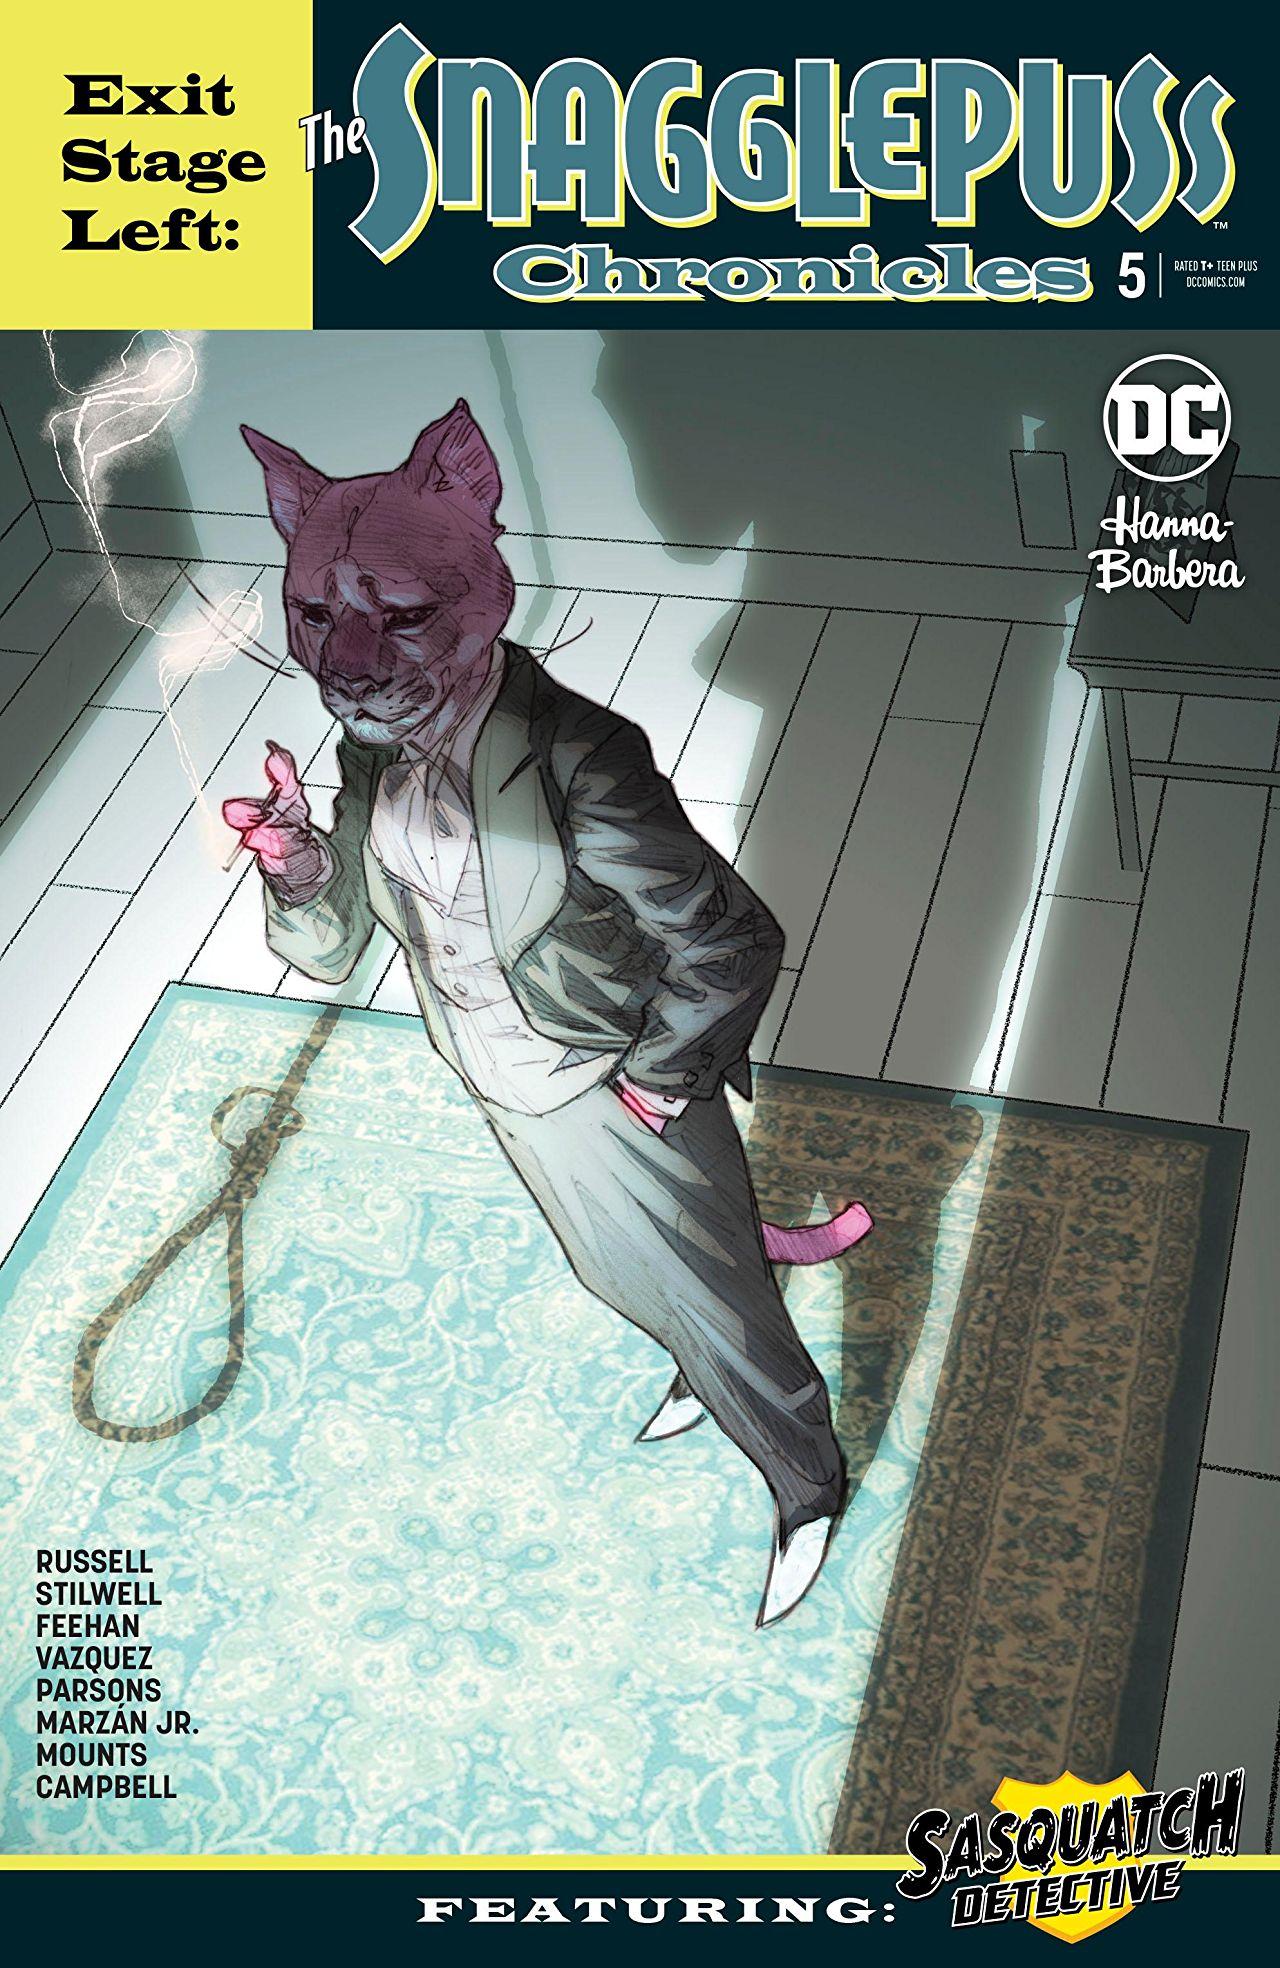 Exit Stage Left: The Snagglepuss Chronicles Vol. 1 #5